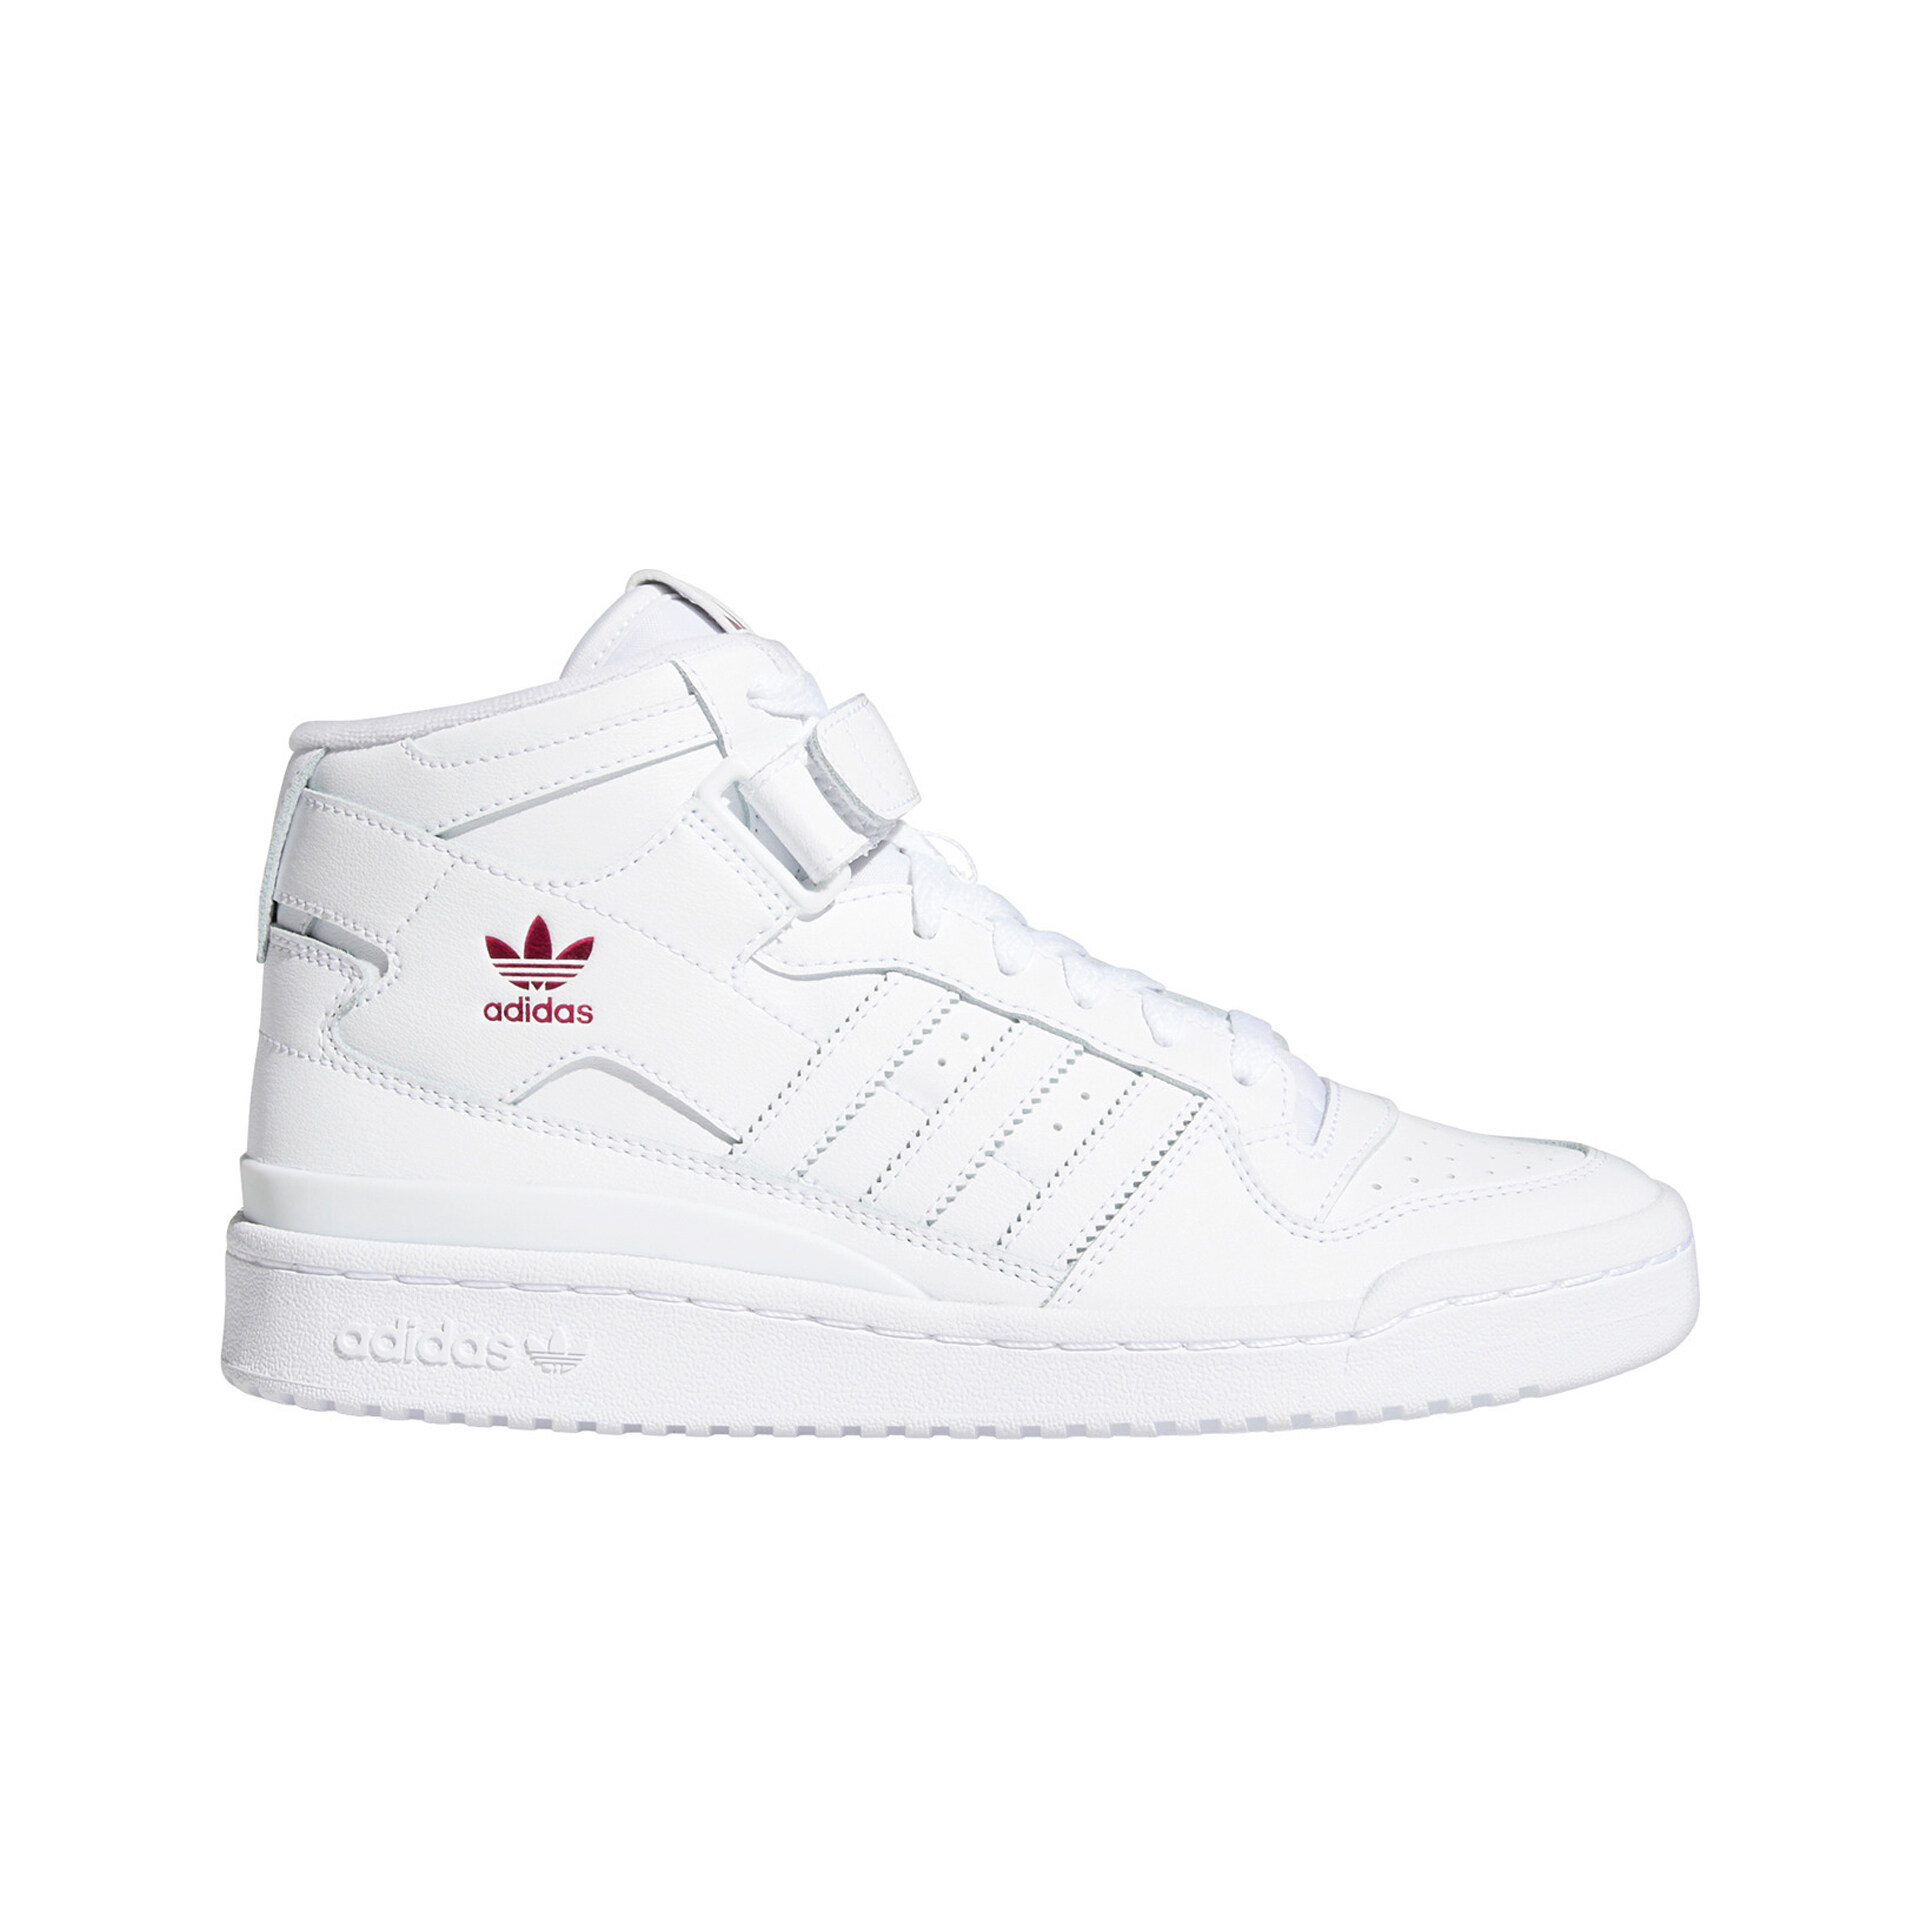 Honorable bruscamente Gángster adidas Forum Mid W blanco zapatillas mujer | Dooers Sneakers